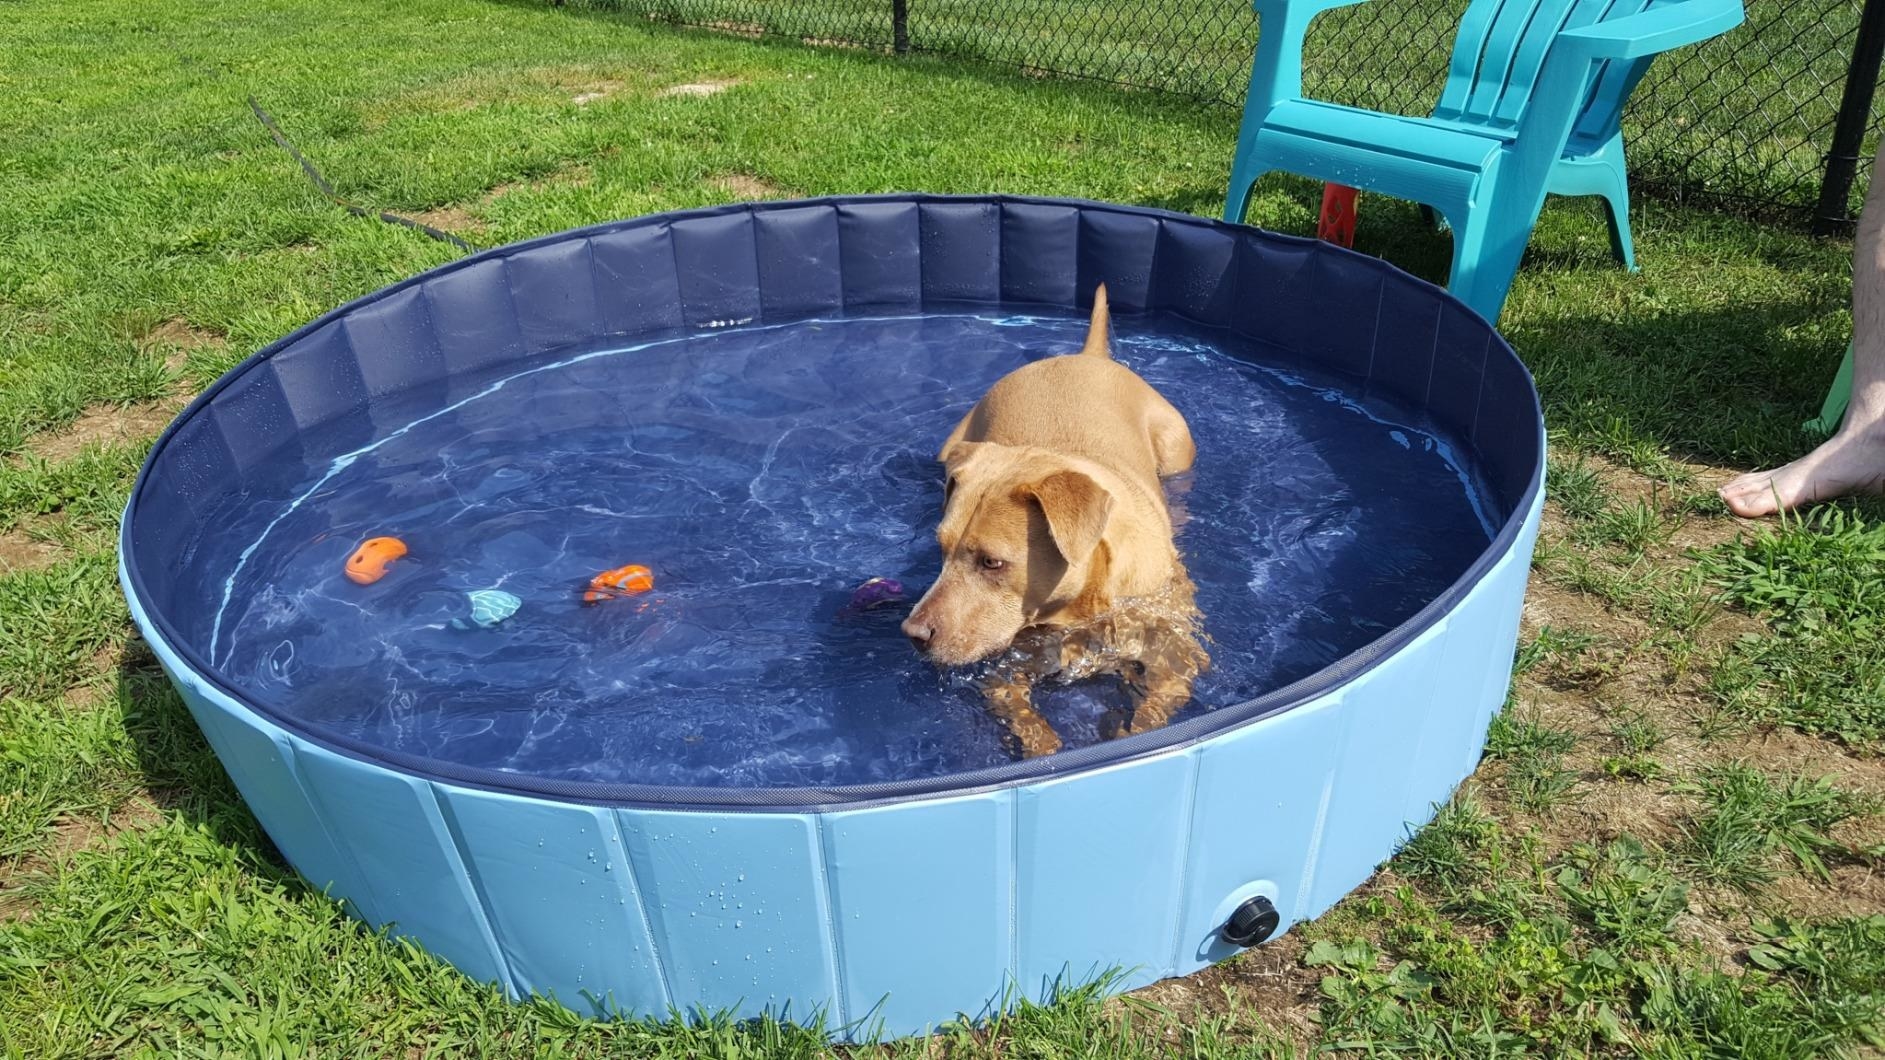 Reviewer&#x27;s large dog relaxing in the pool with plenty of room leftover